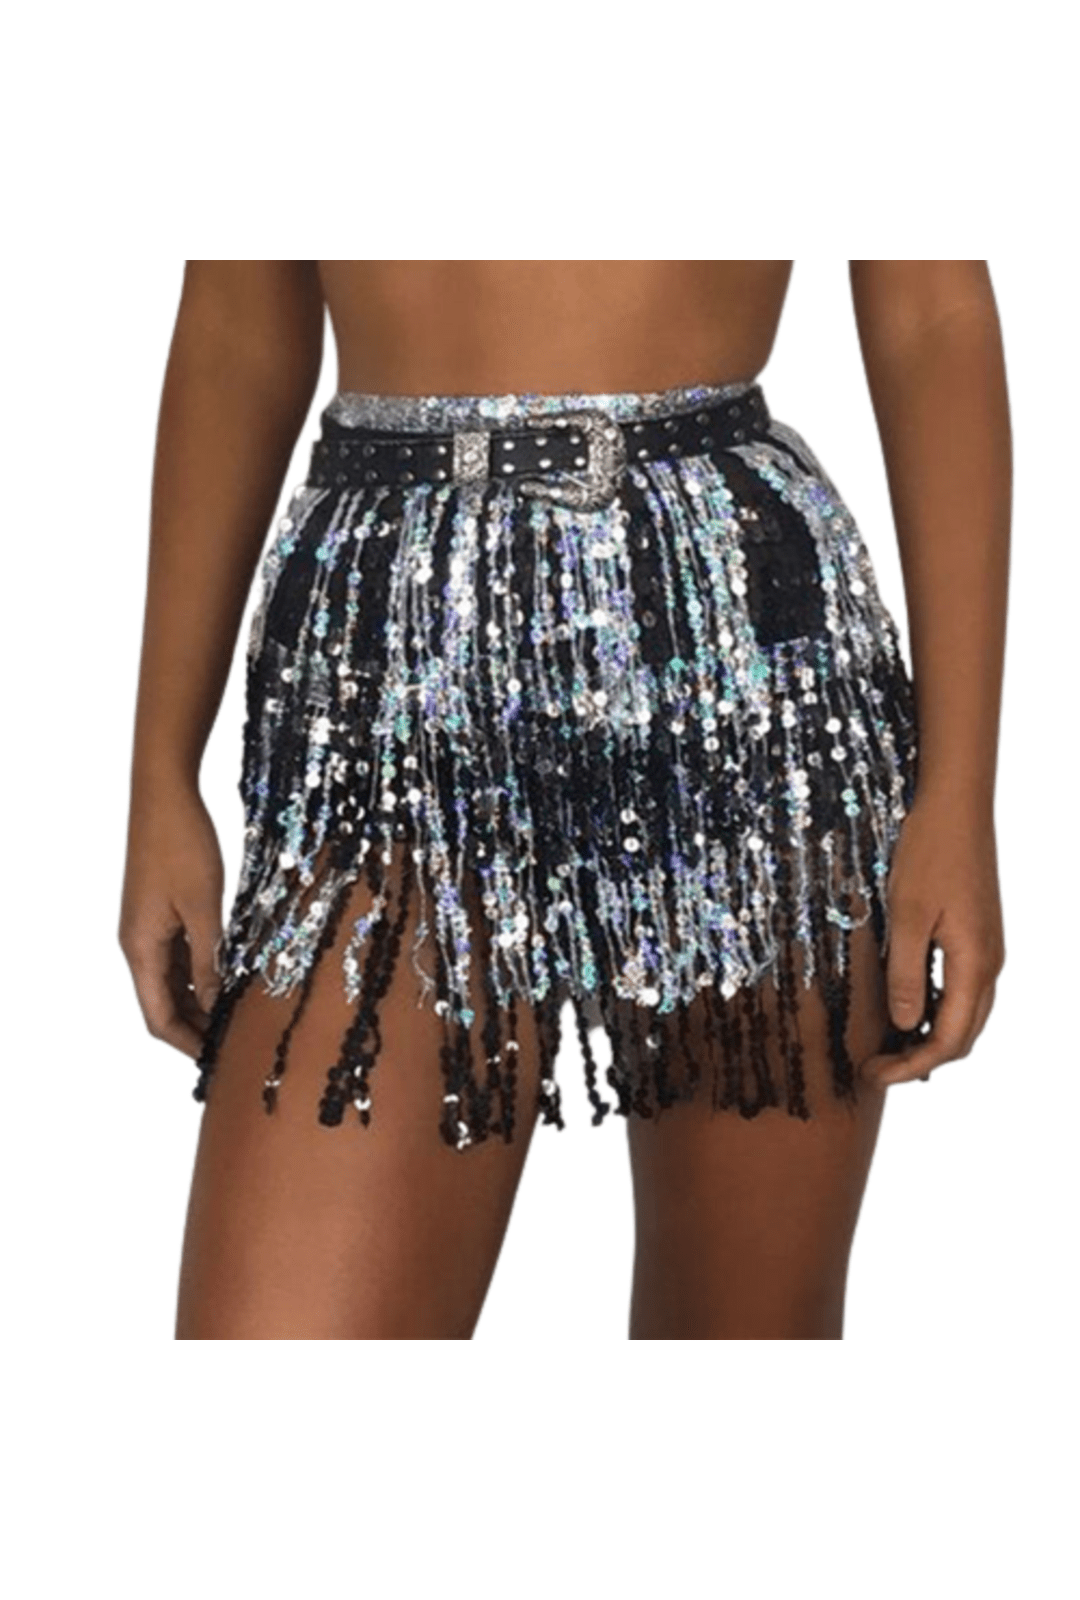 Black and Silver Sequin Wrap Around skirt